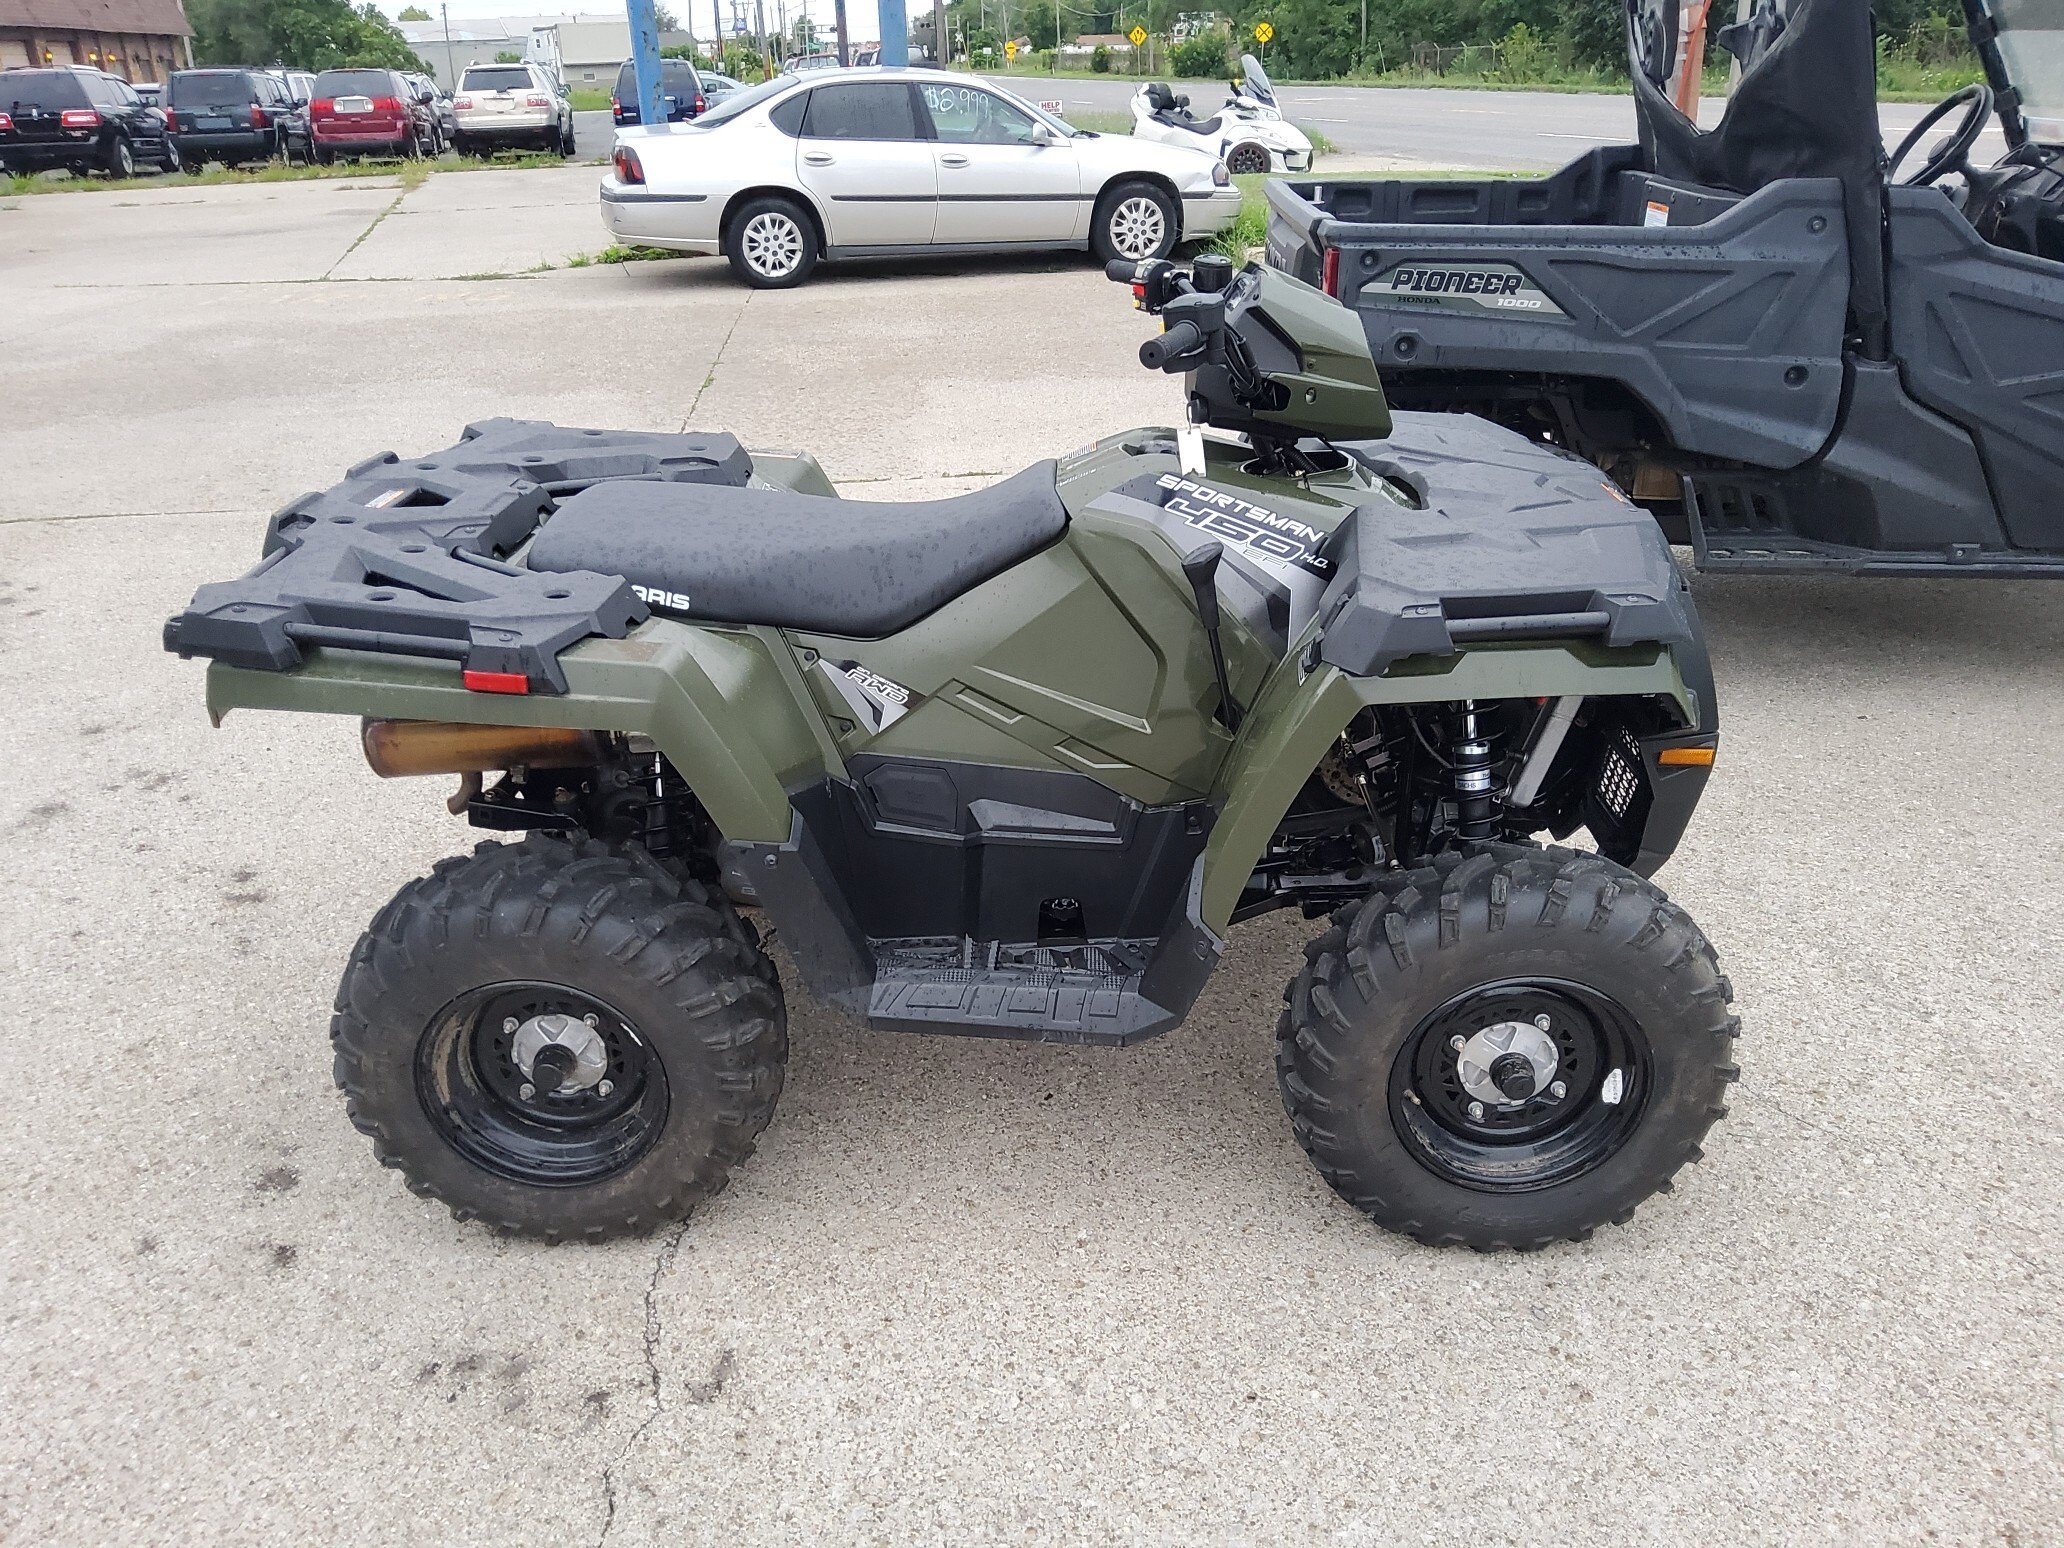 19 Polaris Sportsman 450 Motorcycles For Sale Motorcycles On Autotrader